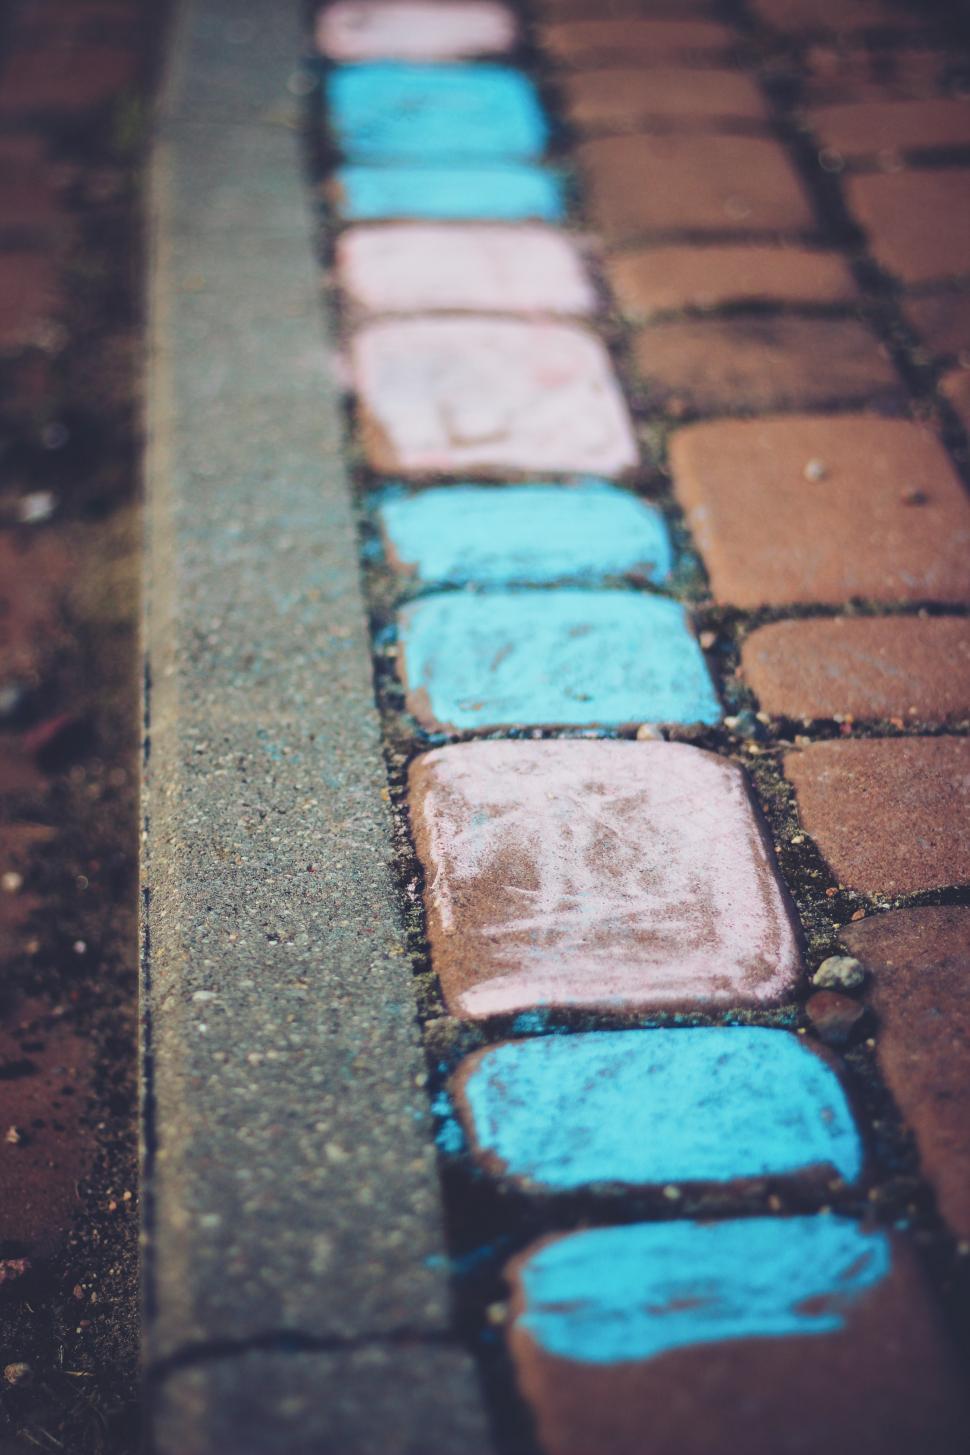 Free Image of Close-Up of a Brick Sidewalk With Blue and Brown Bricks 